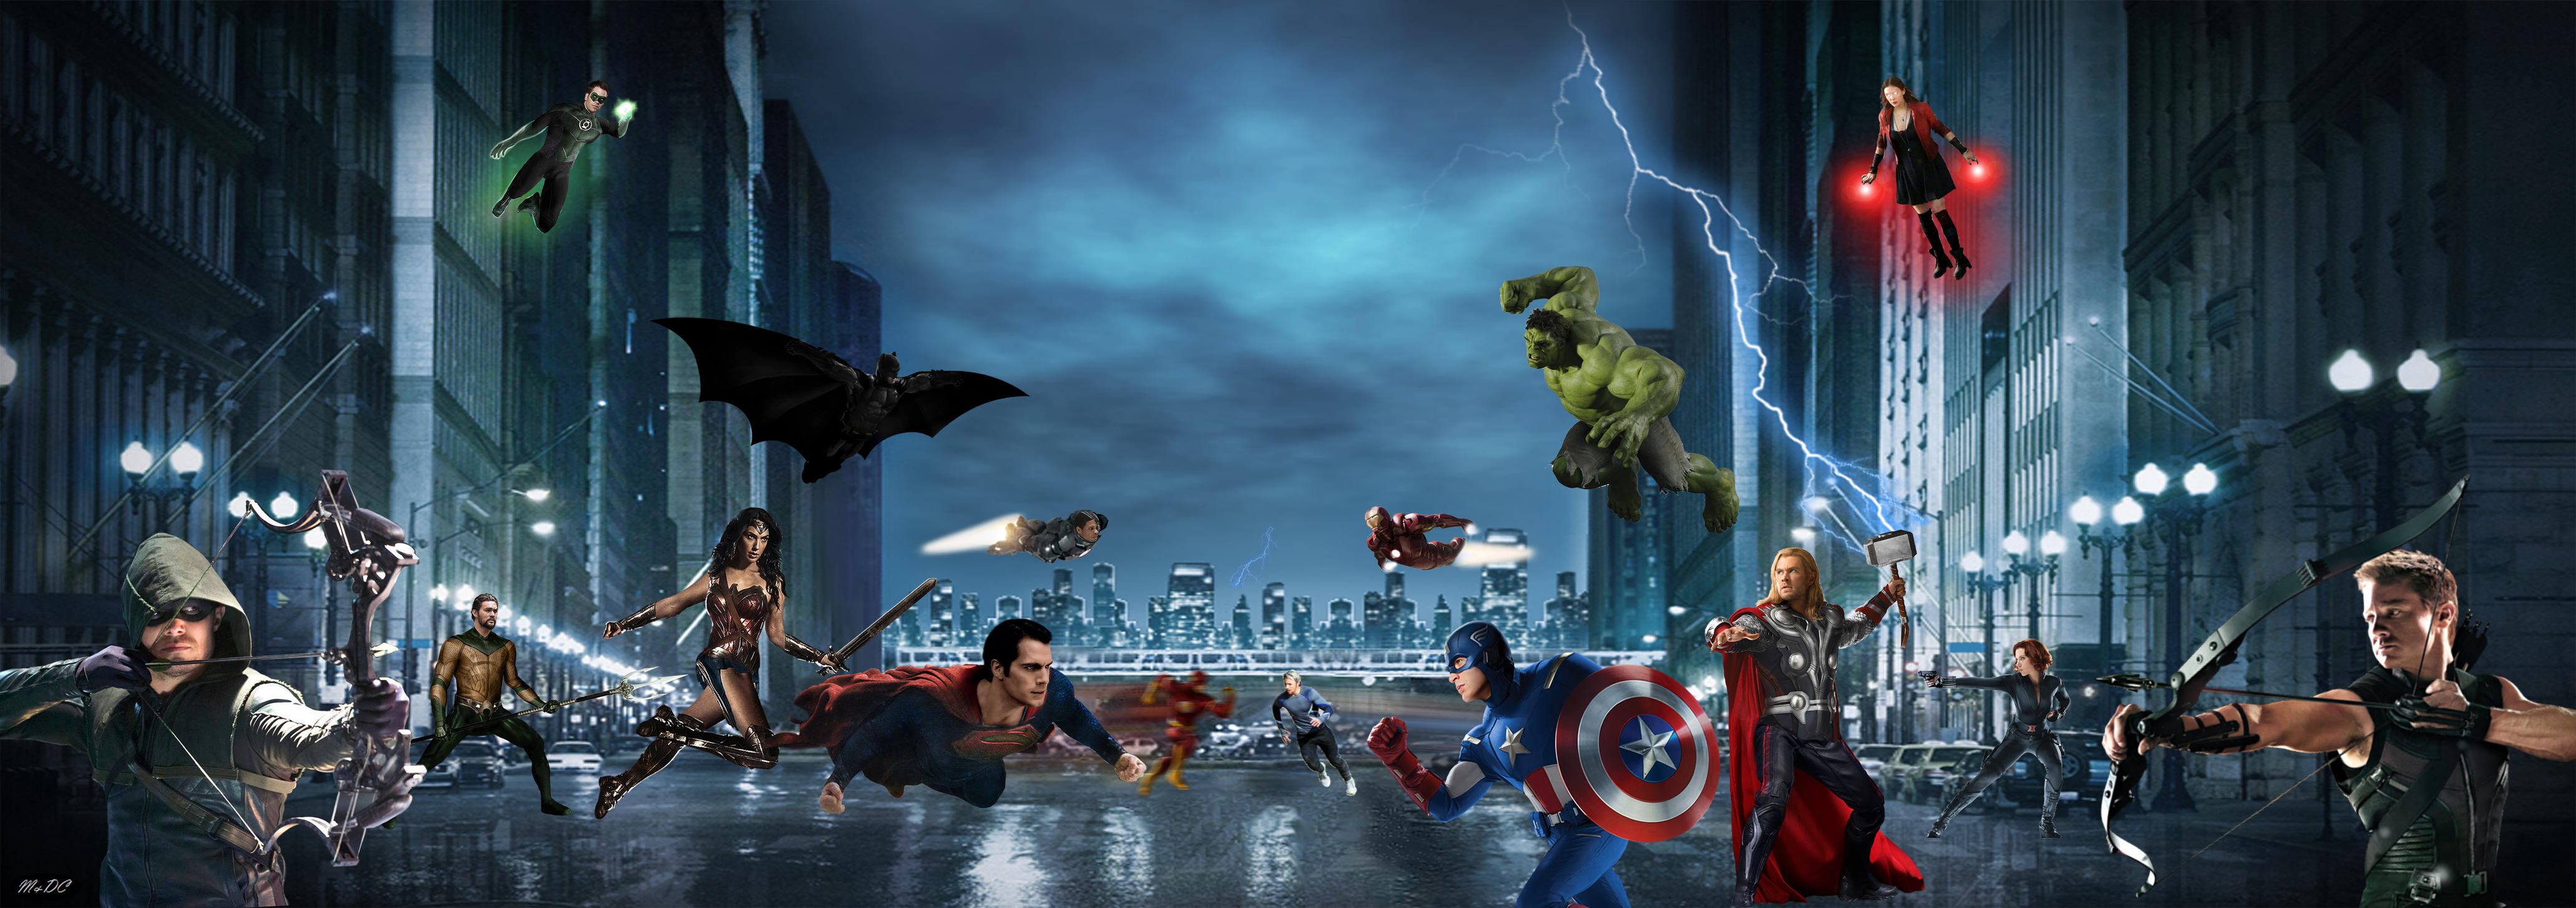 MARVEL vs. DC (aka The Avengers v. Justice League) by